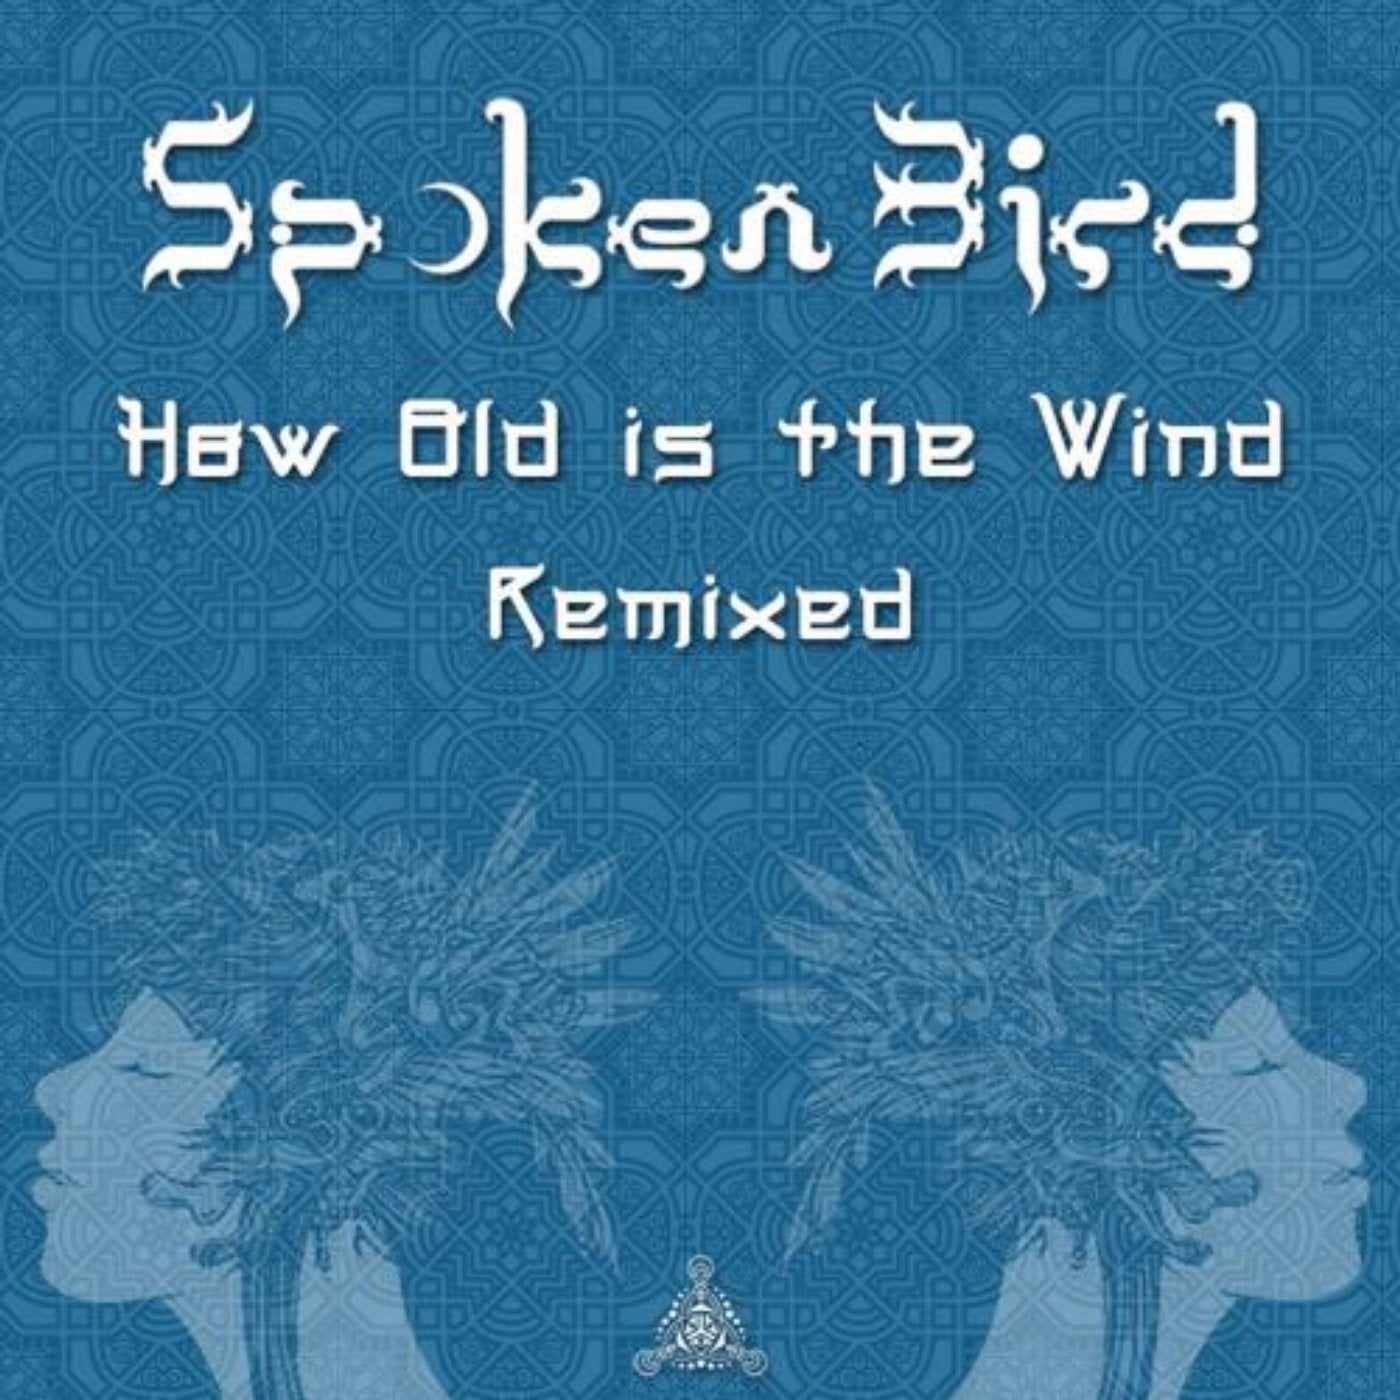 How Old is the Wind (Remixed)